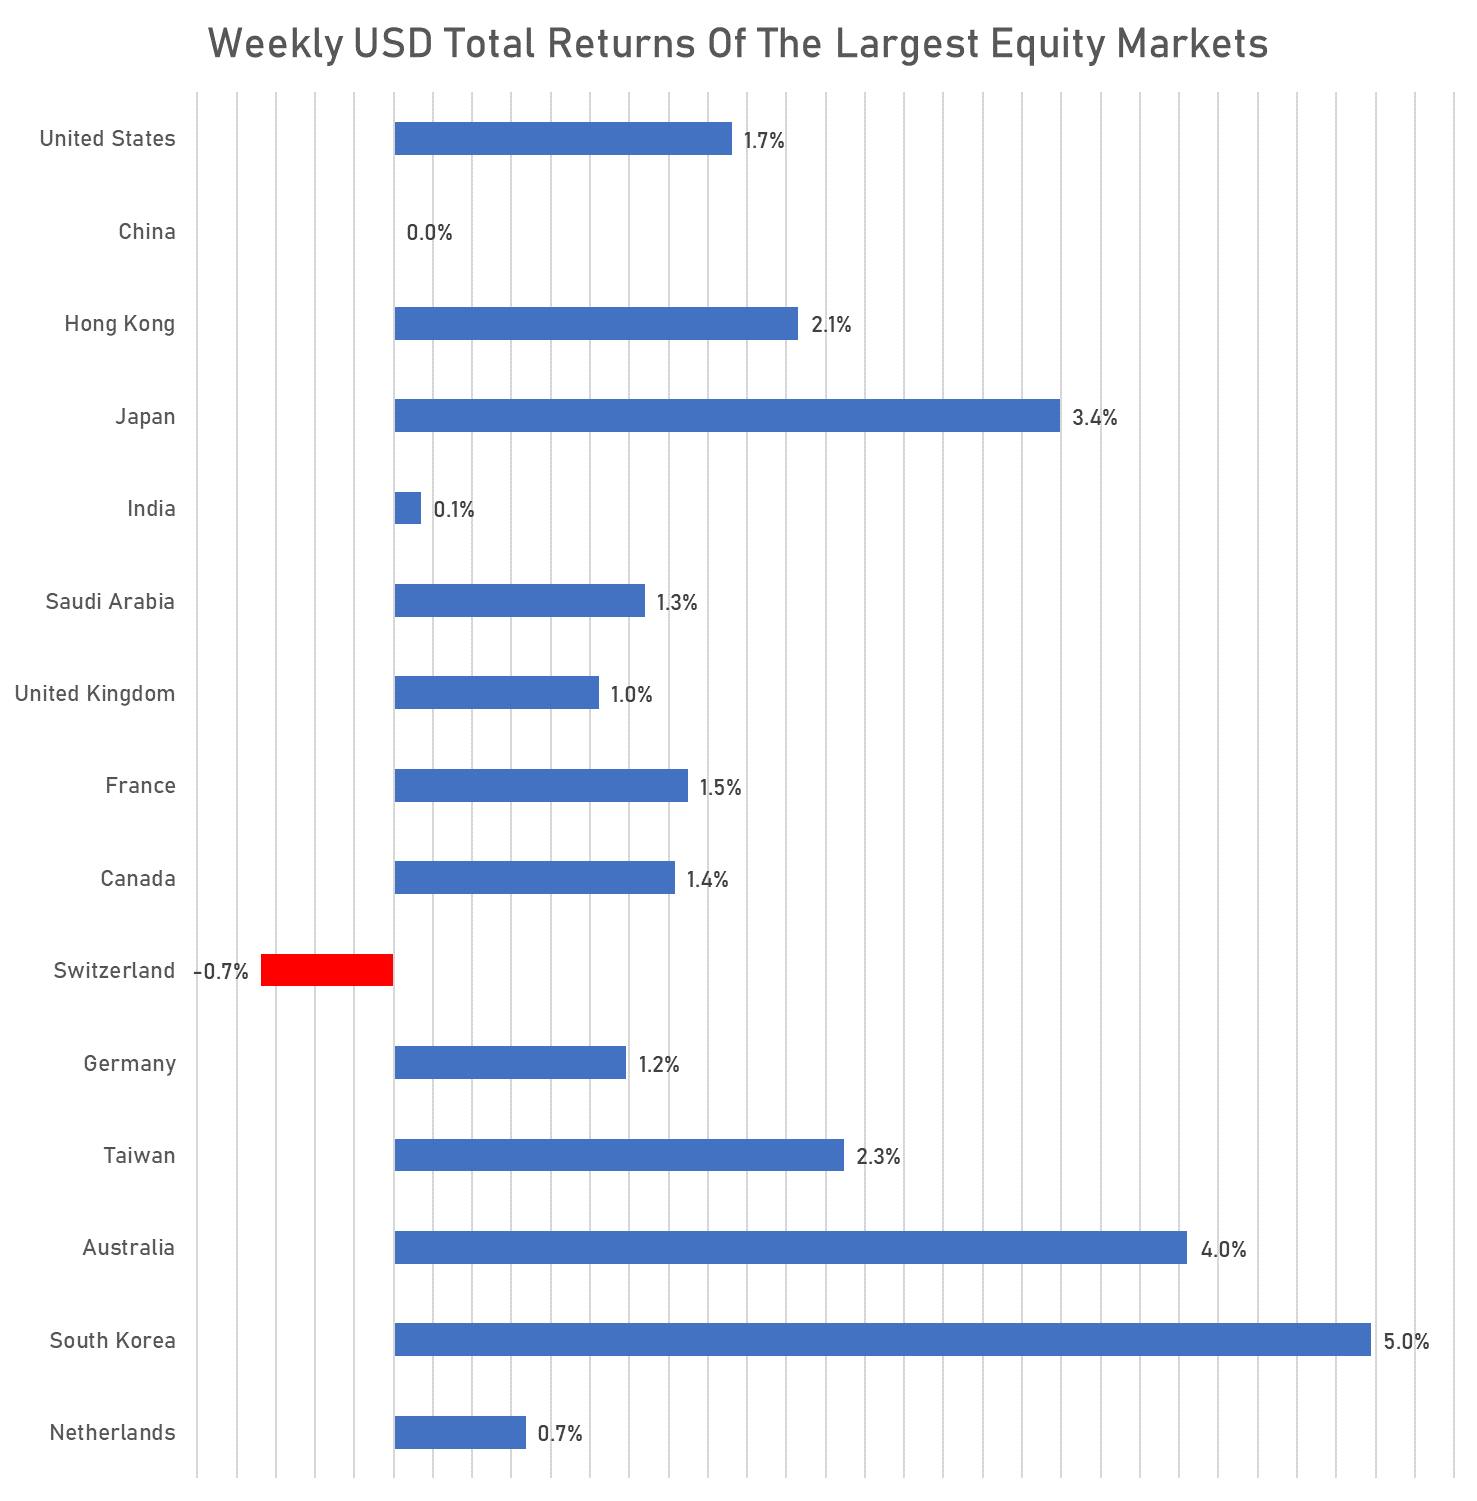 Weekly USD Total Returns For Major Equity Markets | Sources: phipost.com, FactSet data